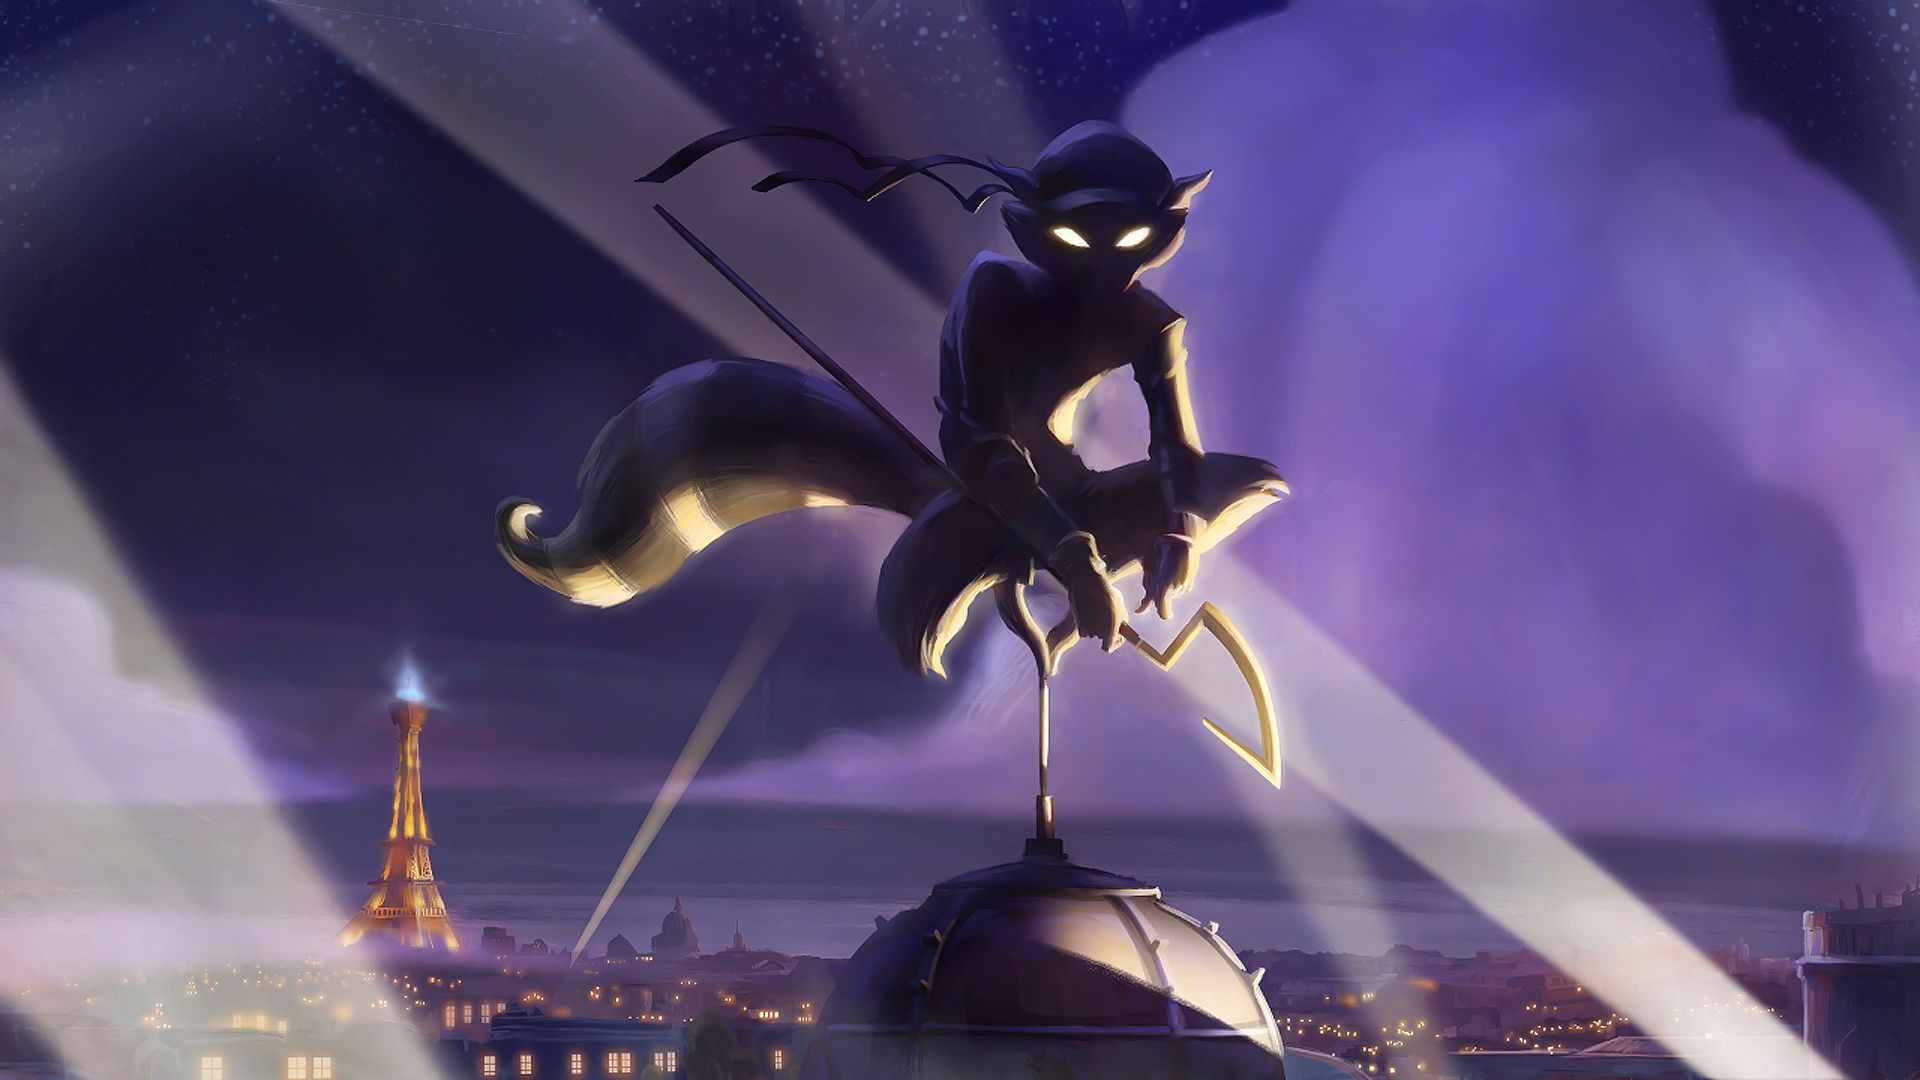 Sly-Cooper-Thieves-in-Time-Art-Sly-5-Developer